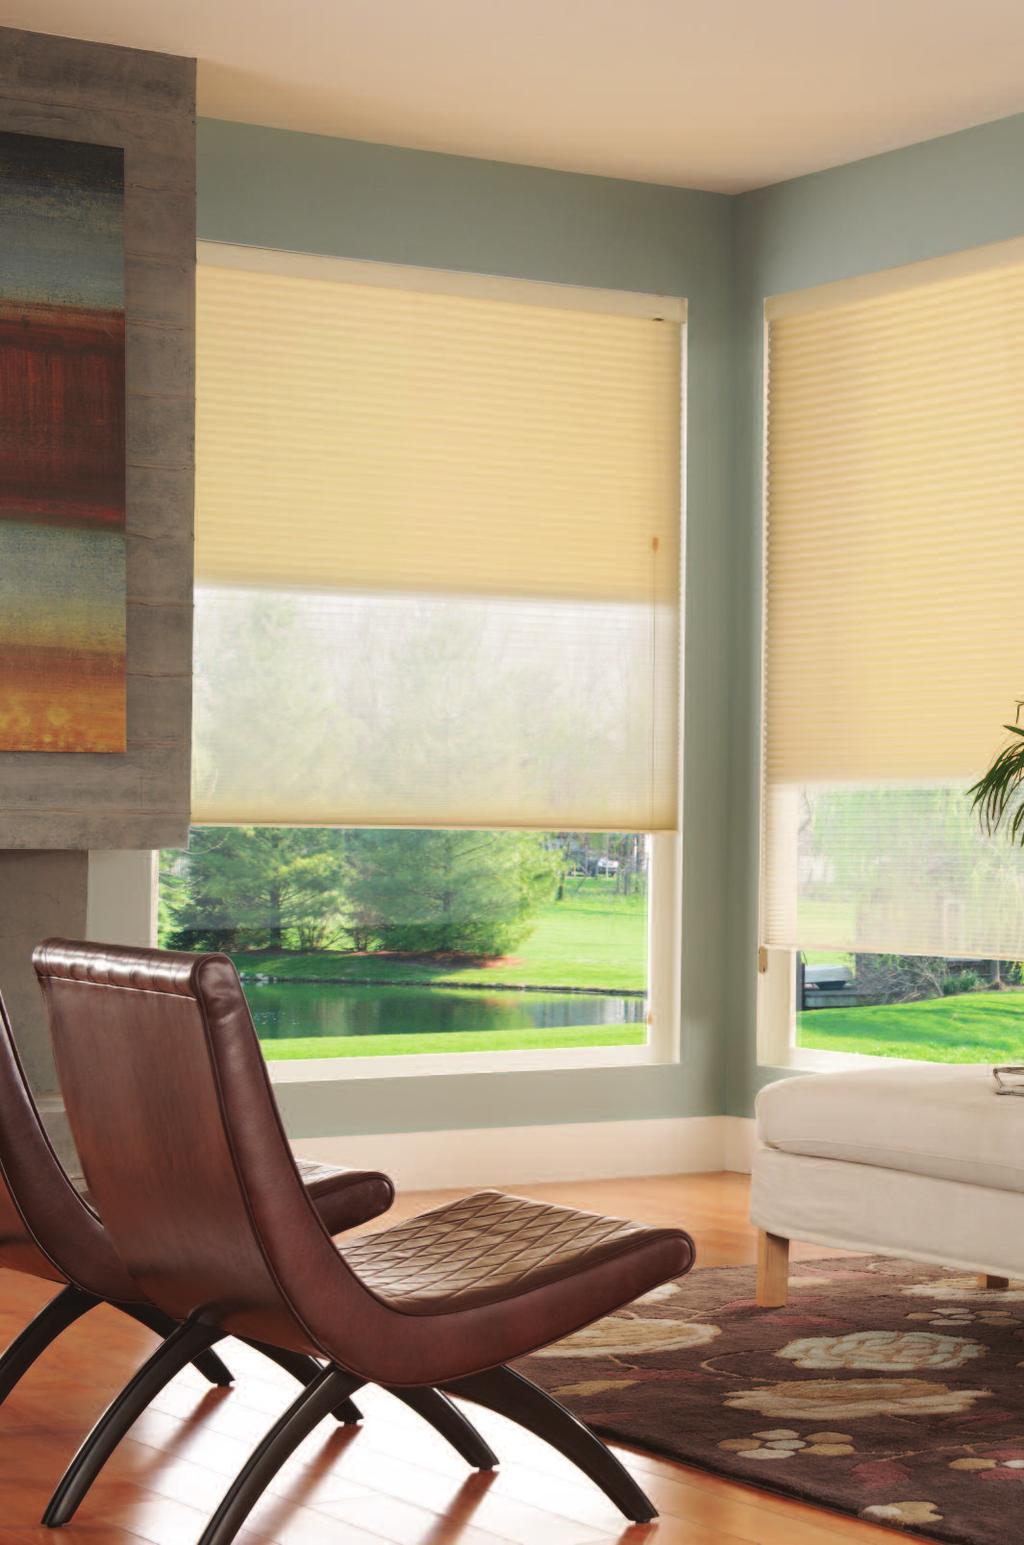 // Tandem Shades features and benefits Innovative design allows choice of honeycomb or 2" Hybrid Pleat shade fabric for the front shade to achieve just the right style and color desired.